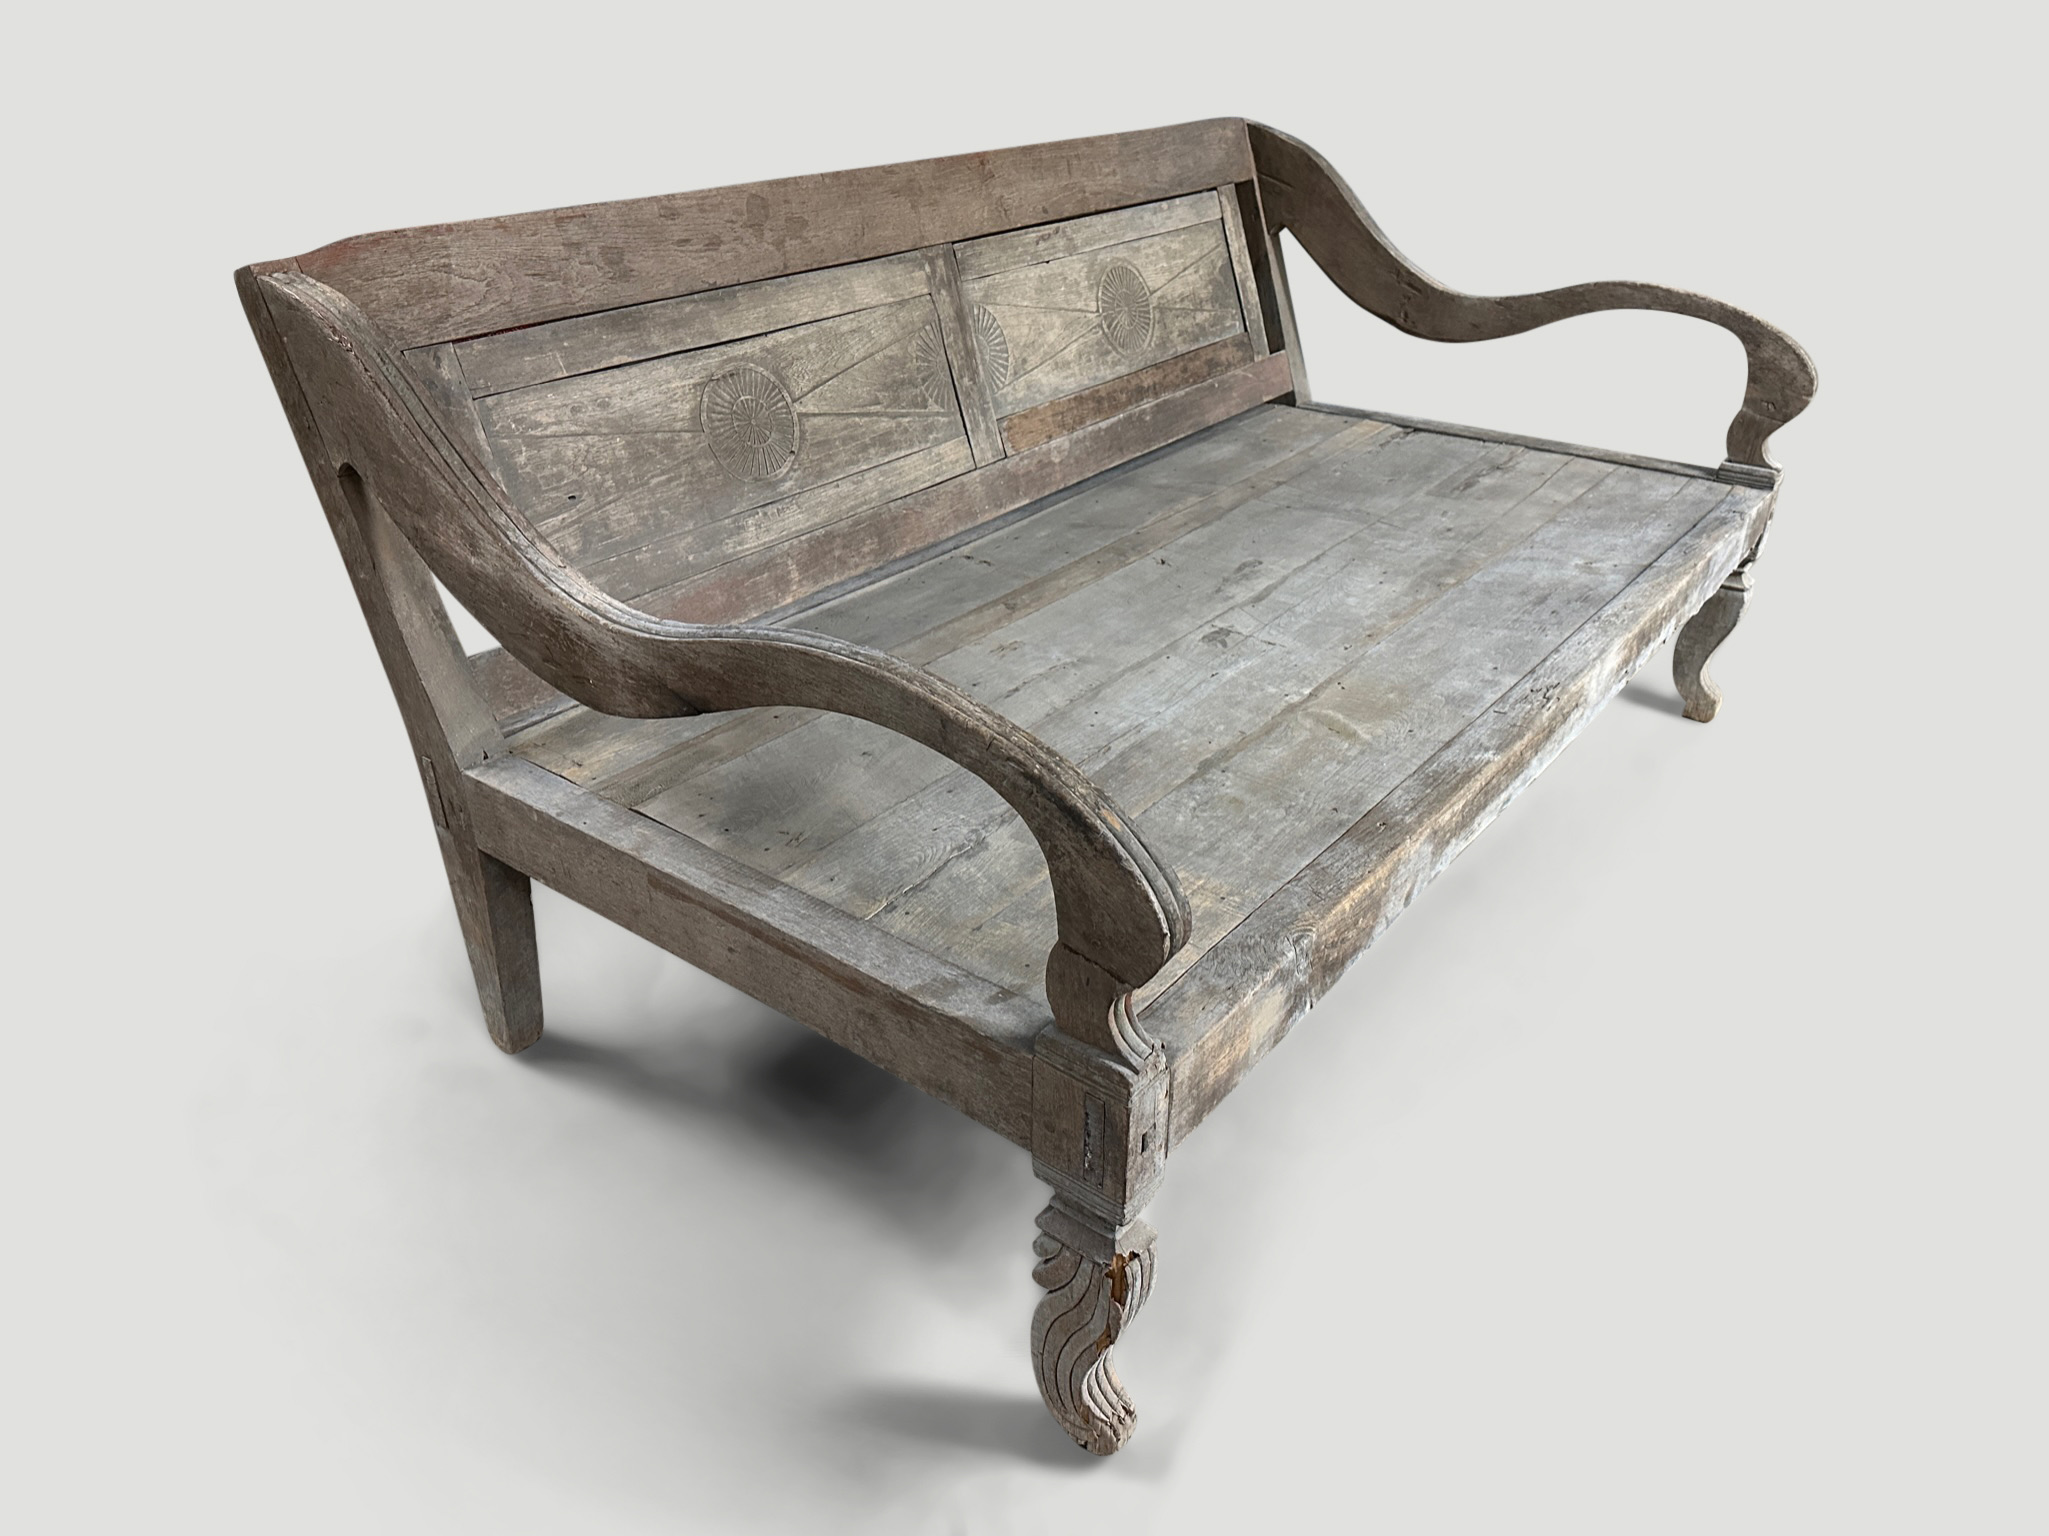 antique teak day bed from the island of Madura